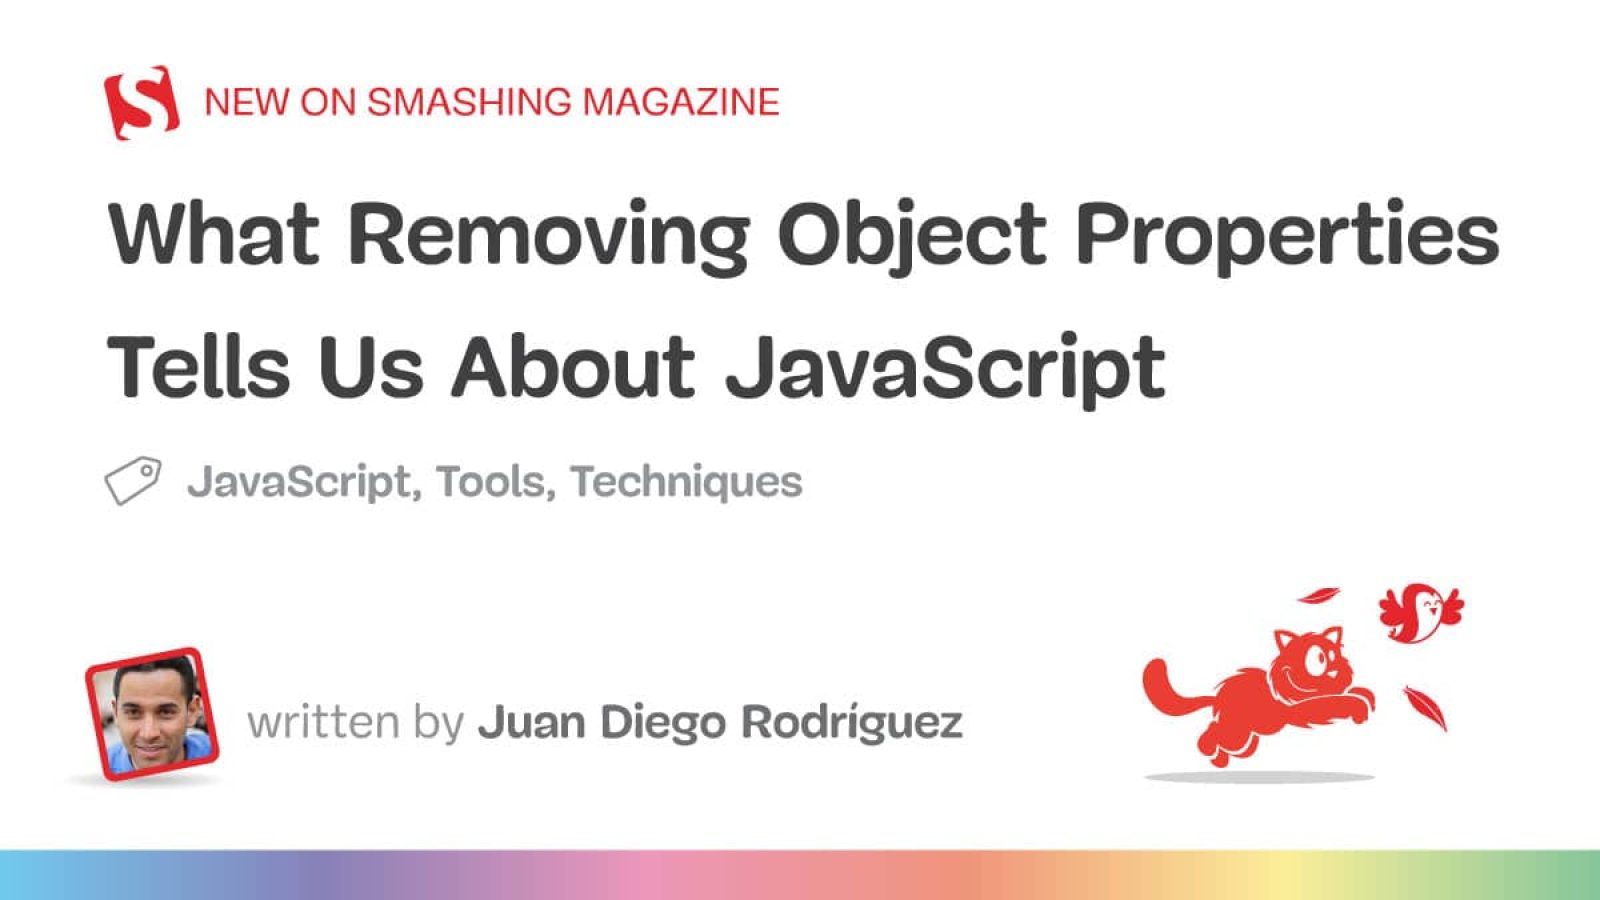 What Eradicating Object Properties Tells Us About JavaScript